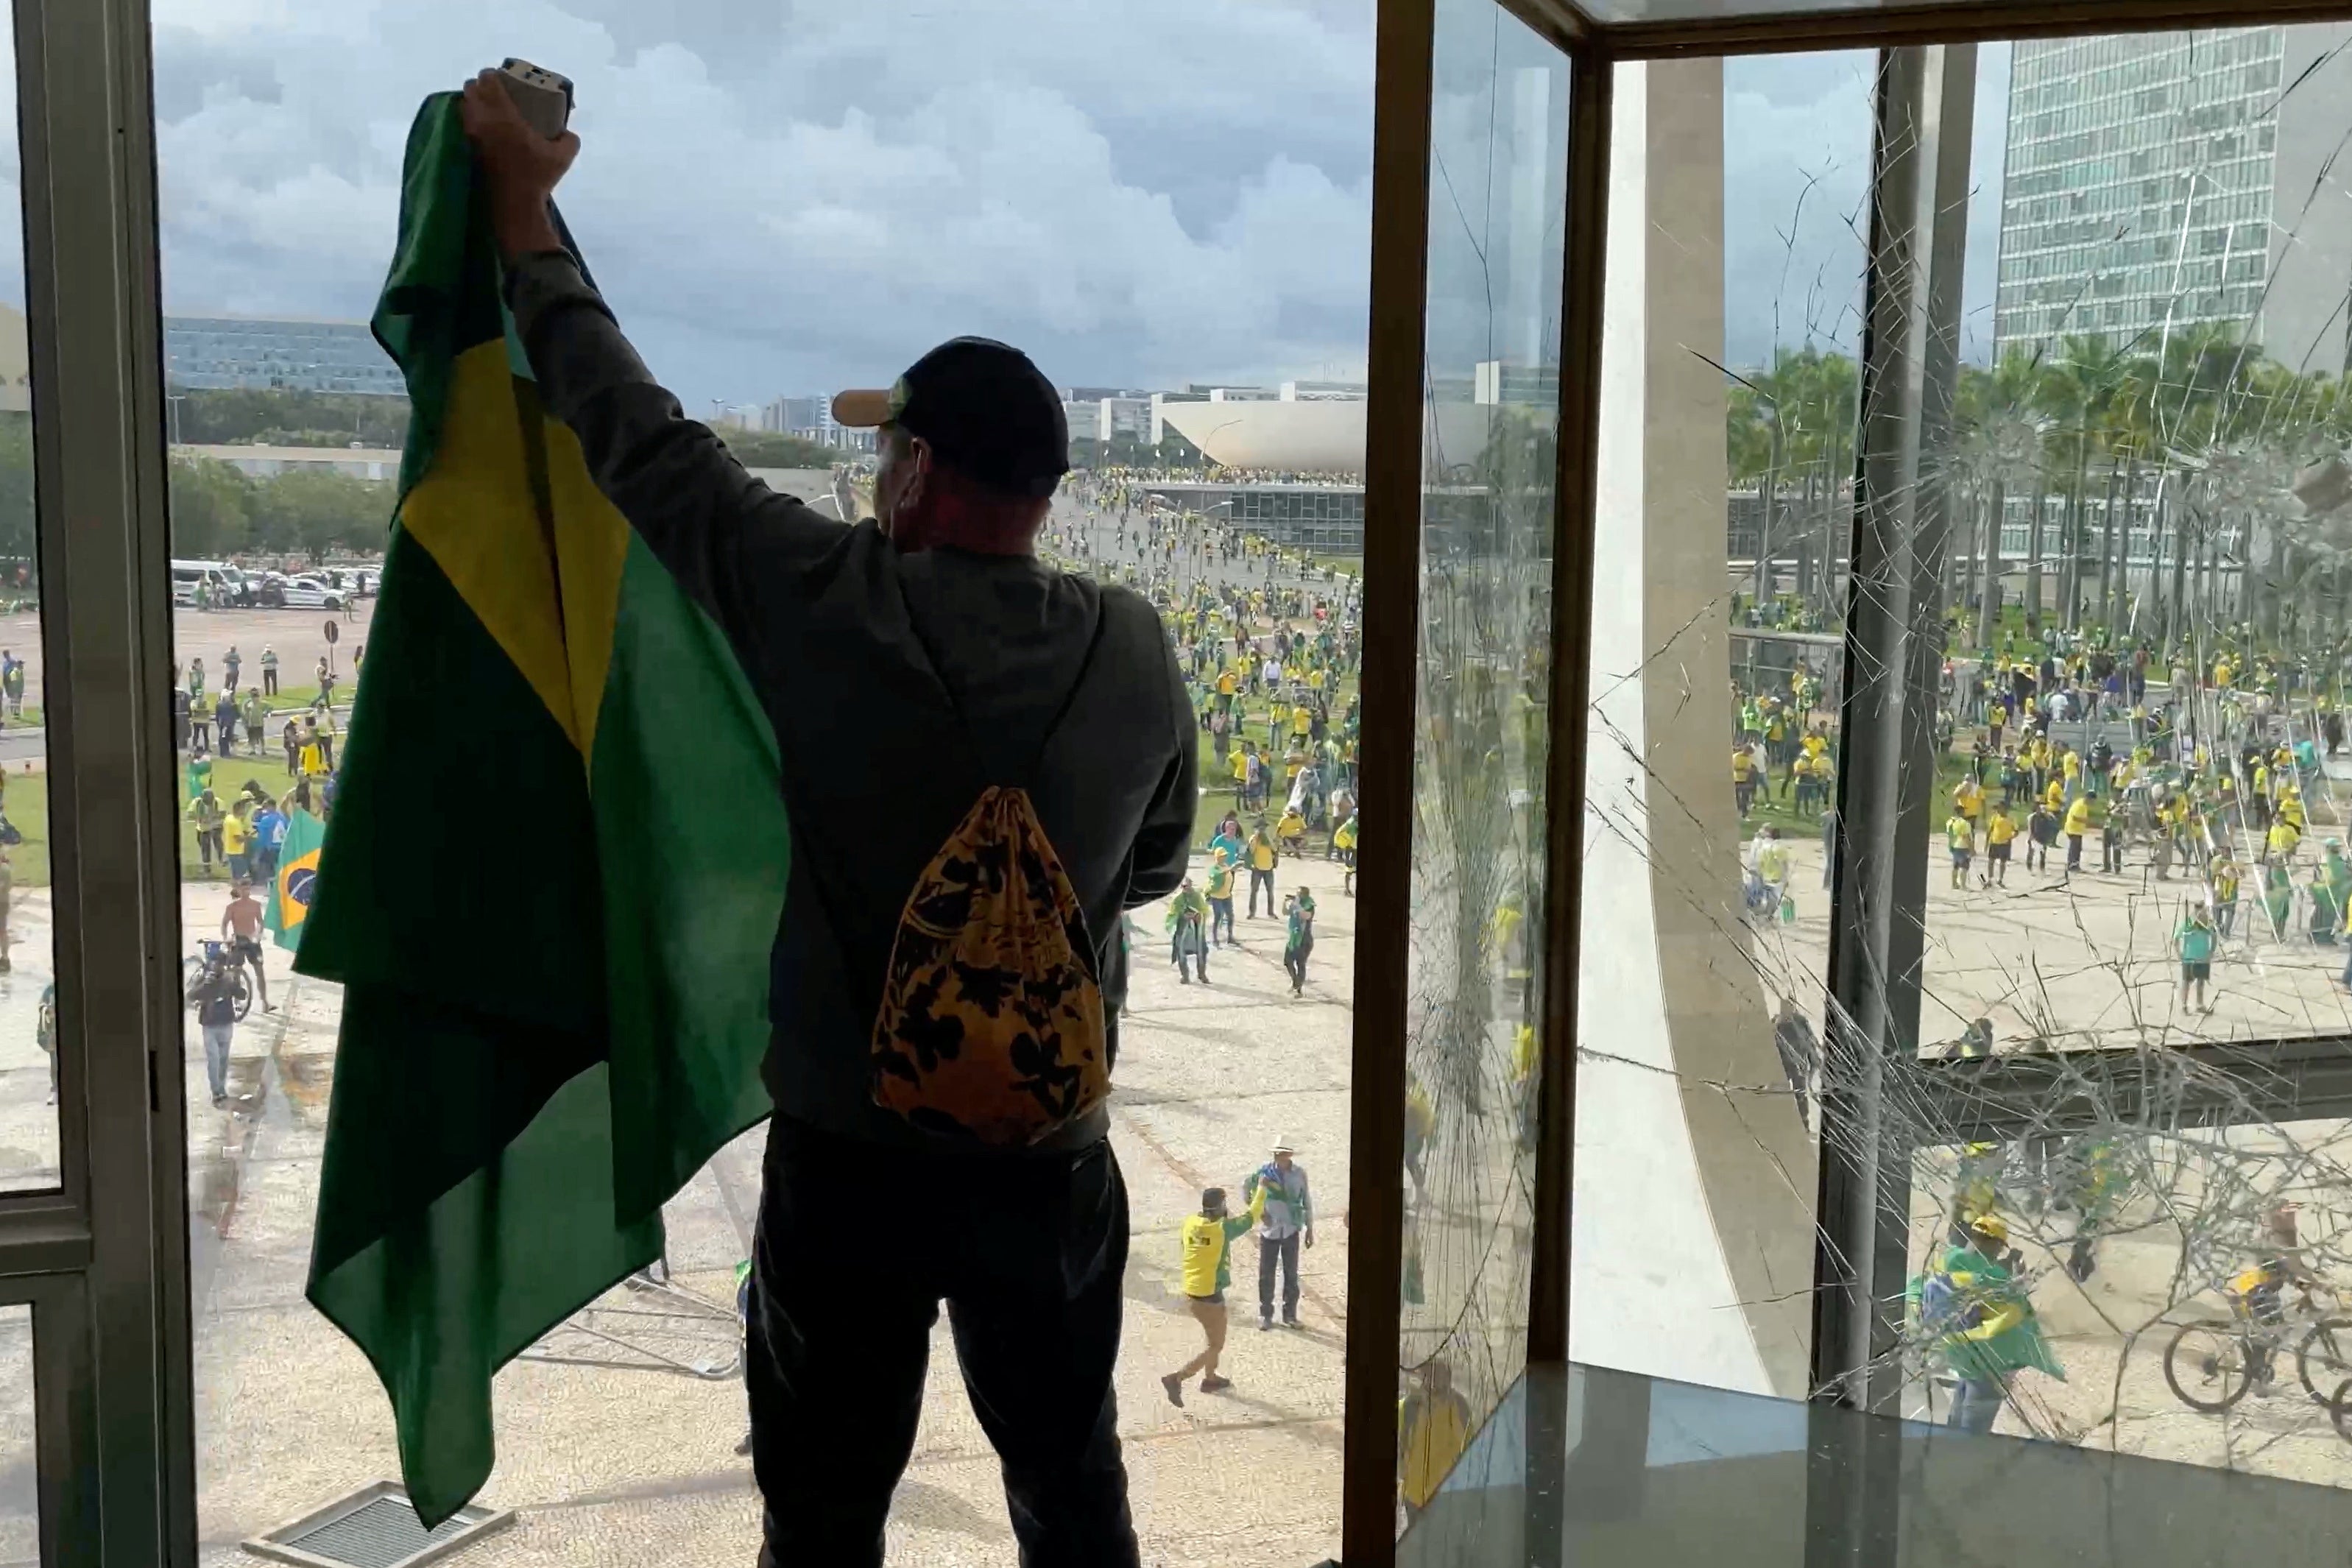 A man holds up a Brazilian flag from inside a government building with shattered windows. A crowd of green-and-yellow clad protesters can be seen outside.